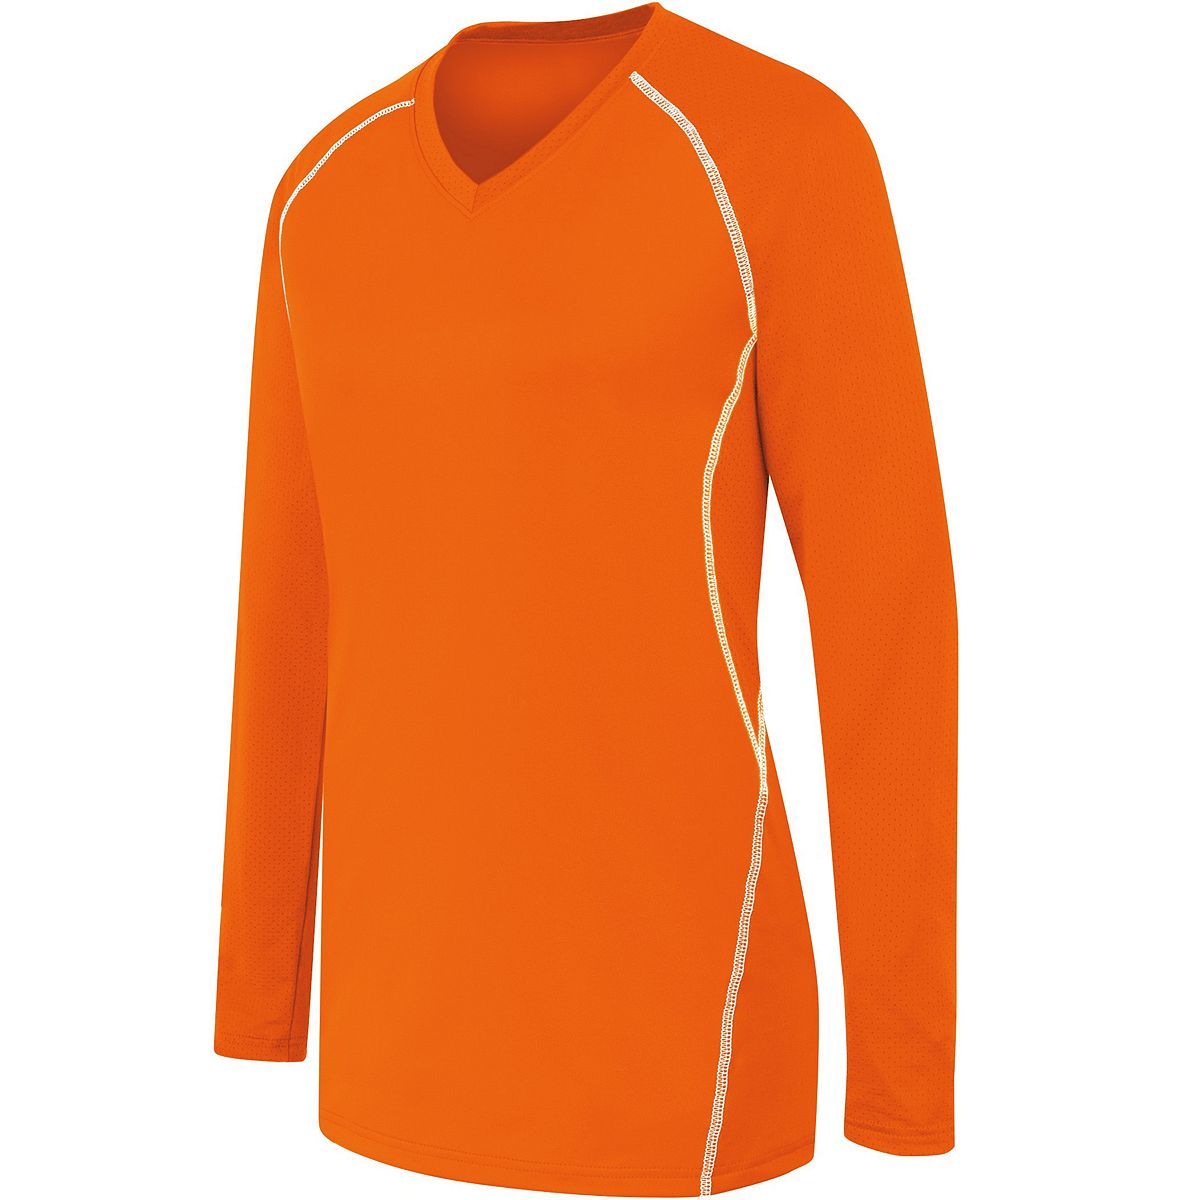 High 5 Ladies Long Sleeve Solid Jersey in Orange/White  -Part of the Ladies, Ladies-Jersey, High5-Products, Volleyball, Shirts product lines at KanaleyCreations.com